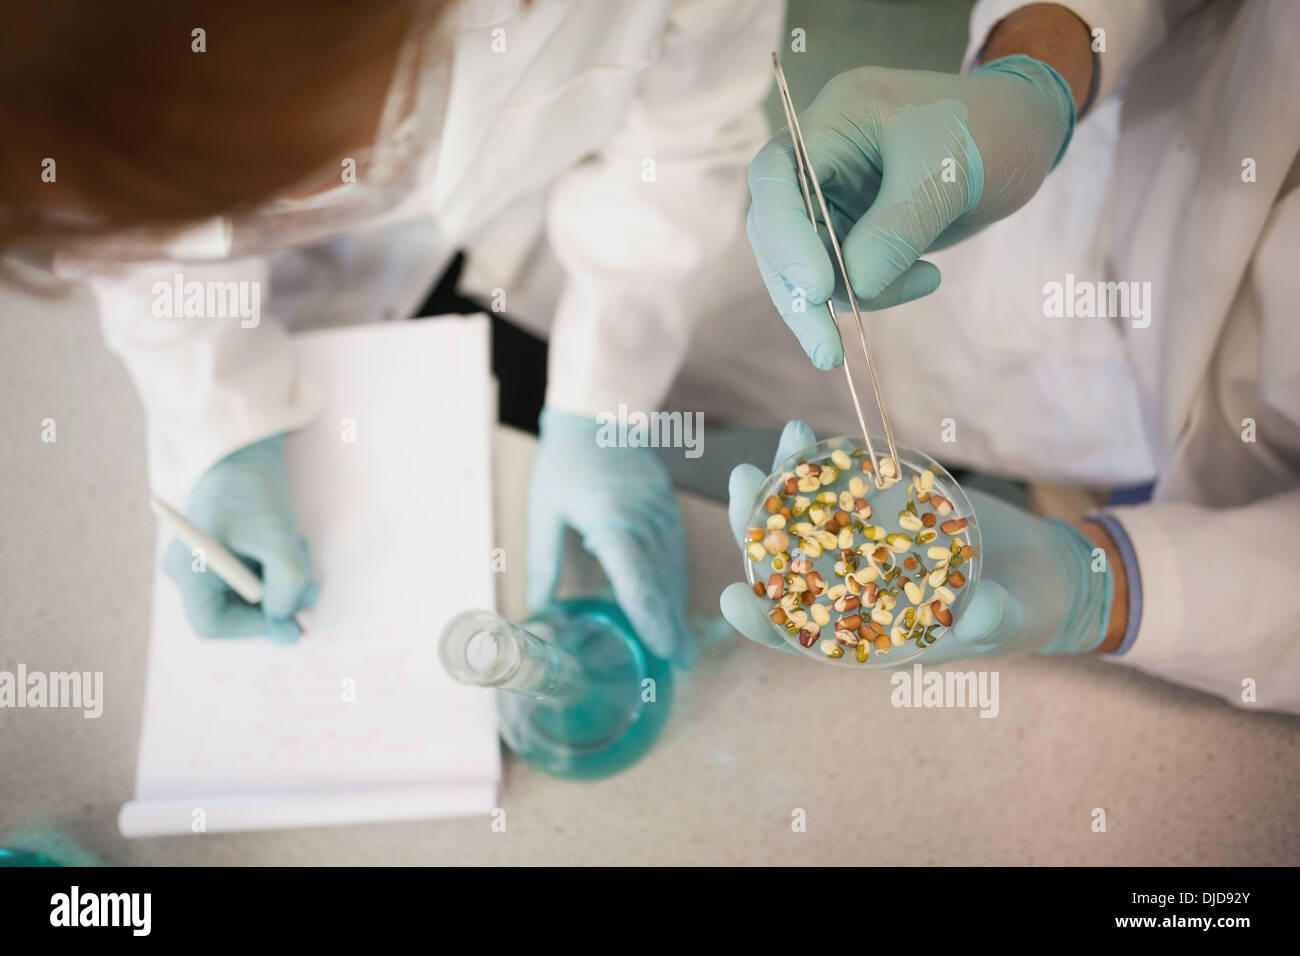 Two scientists wearing lab coats working with a petri dish and en erlenmeyer flask Stock Photo